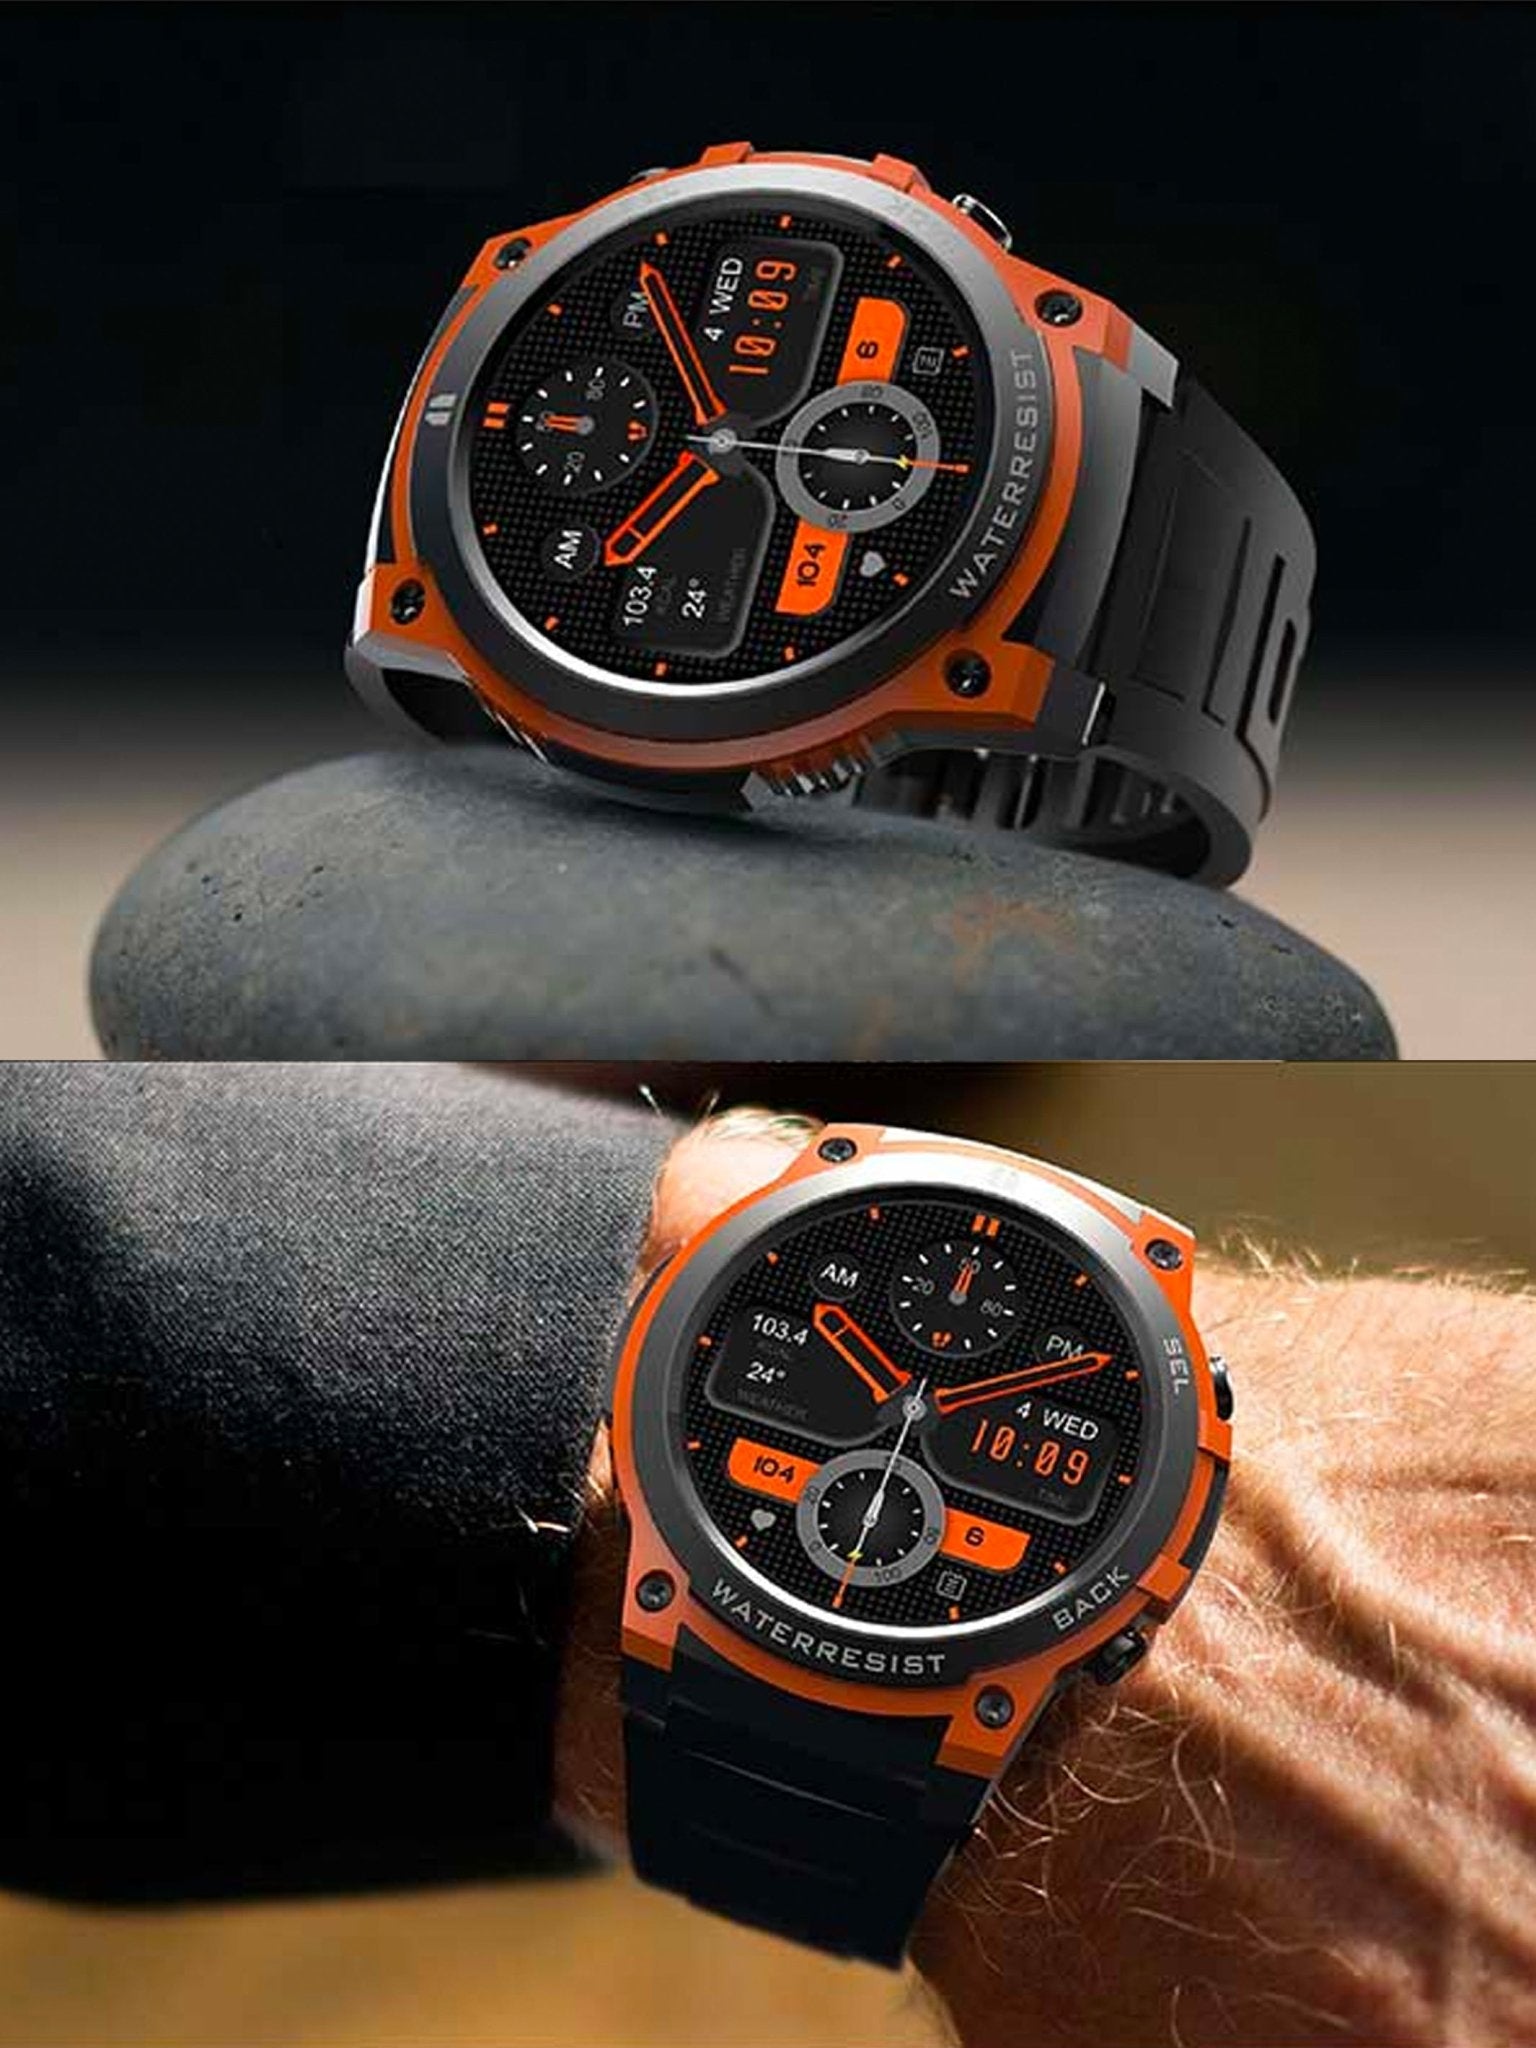 4elementsclothingTelsaDM55 Pulse AMOLED touchscreen IP68 Waterproof - Smart Watch for Men Women, 1.43" Smartwatch, Fitness Watch with Heart Rate Sleep Monitor, Step Counter, 100+ Sports, Fitness Smartwatches / Android IOSWatch5060976971396